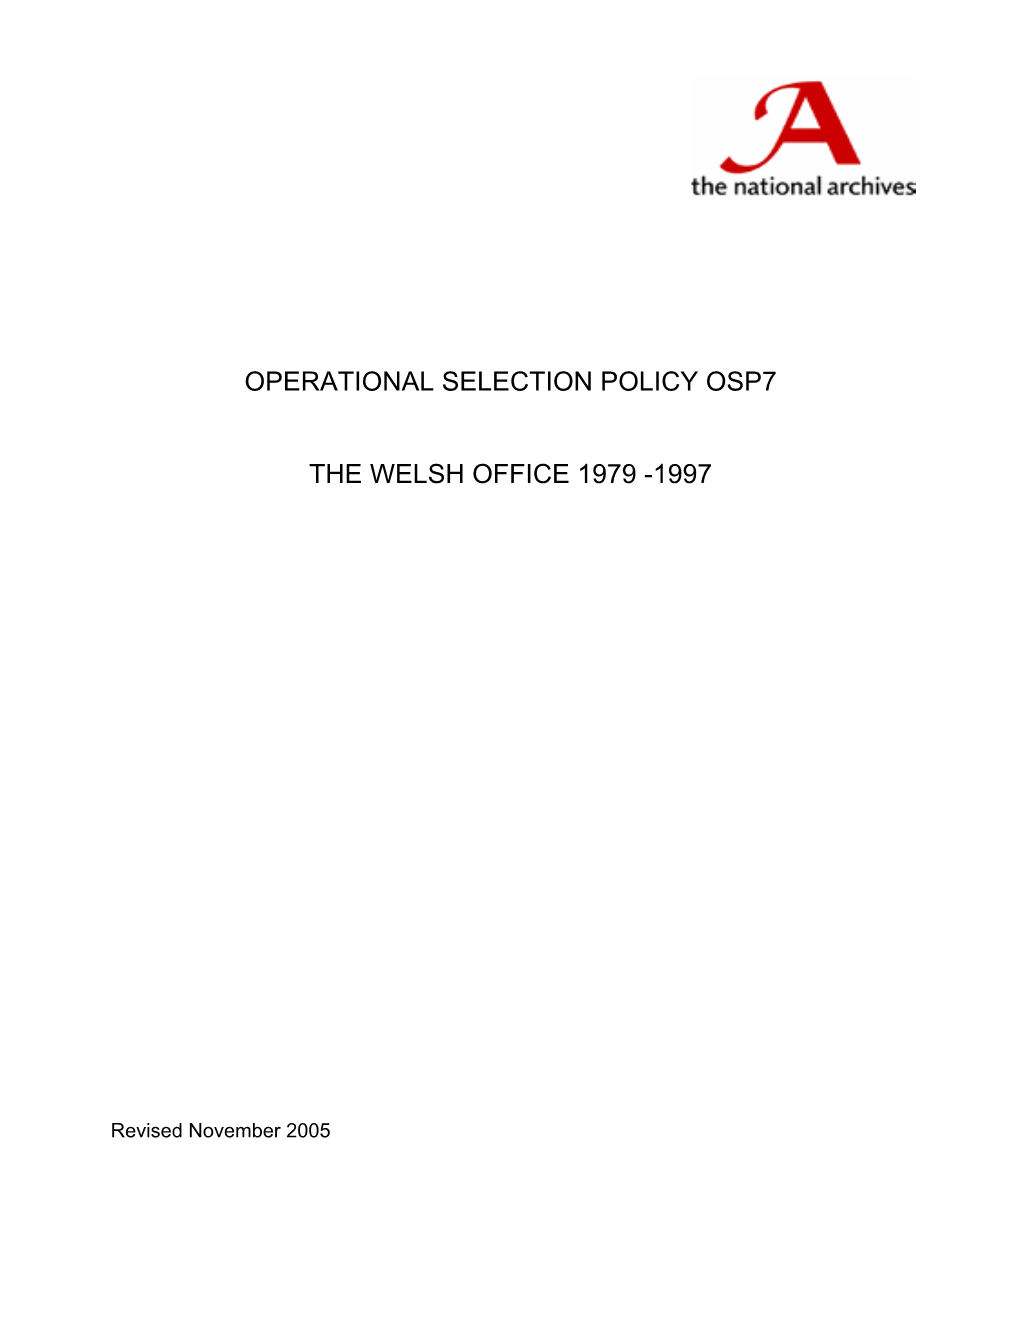 Operational Selection Policy Osp7 the Welsh Office 1979